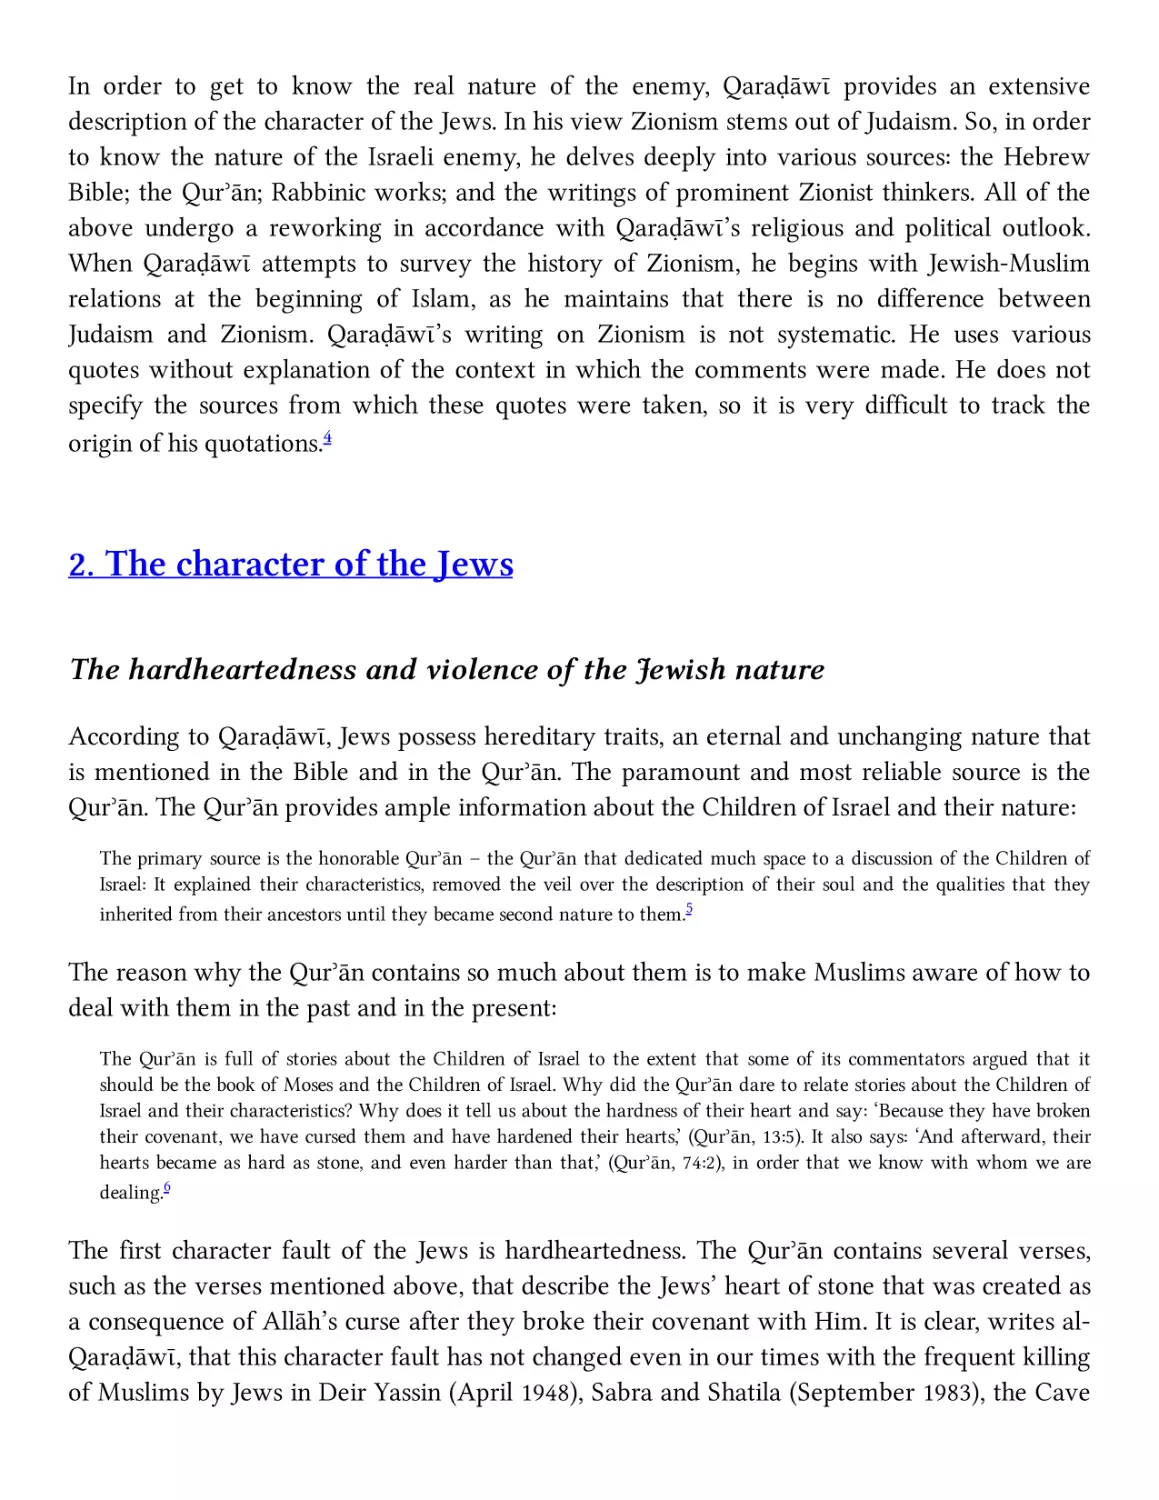 2. The character of the Jews